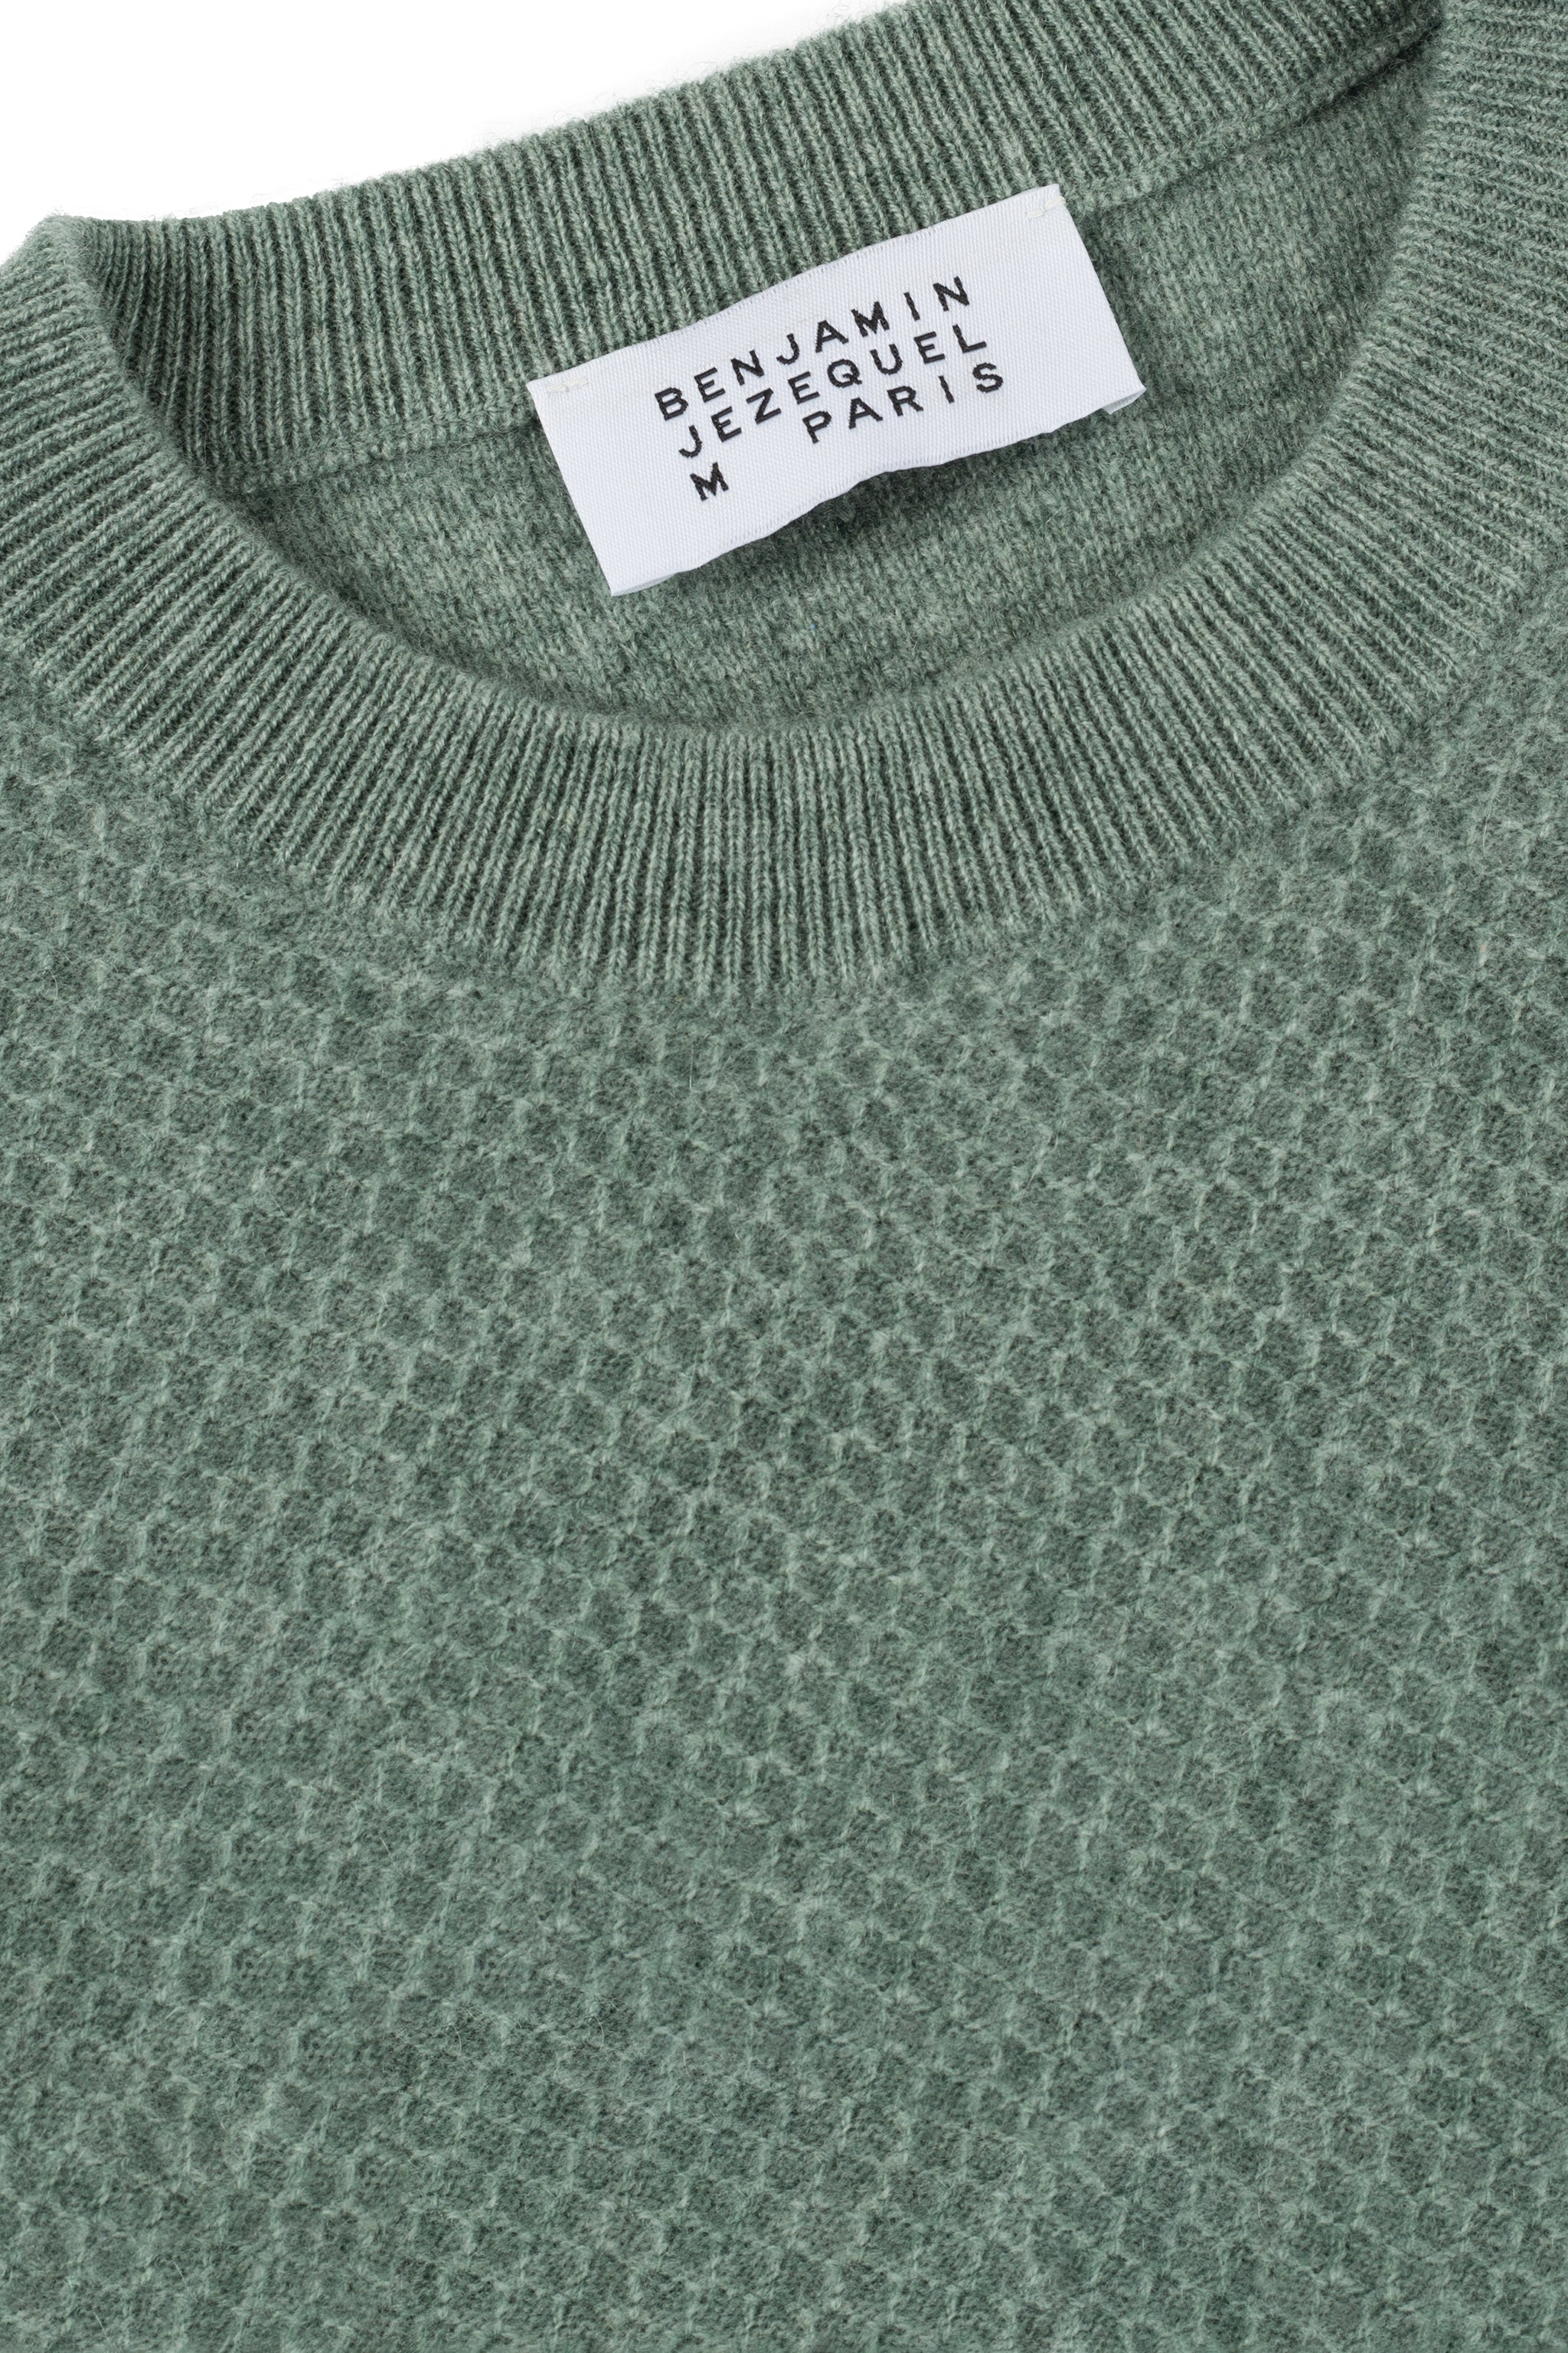 a green sweater with a tag on it